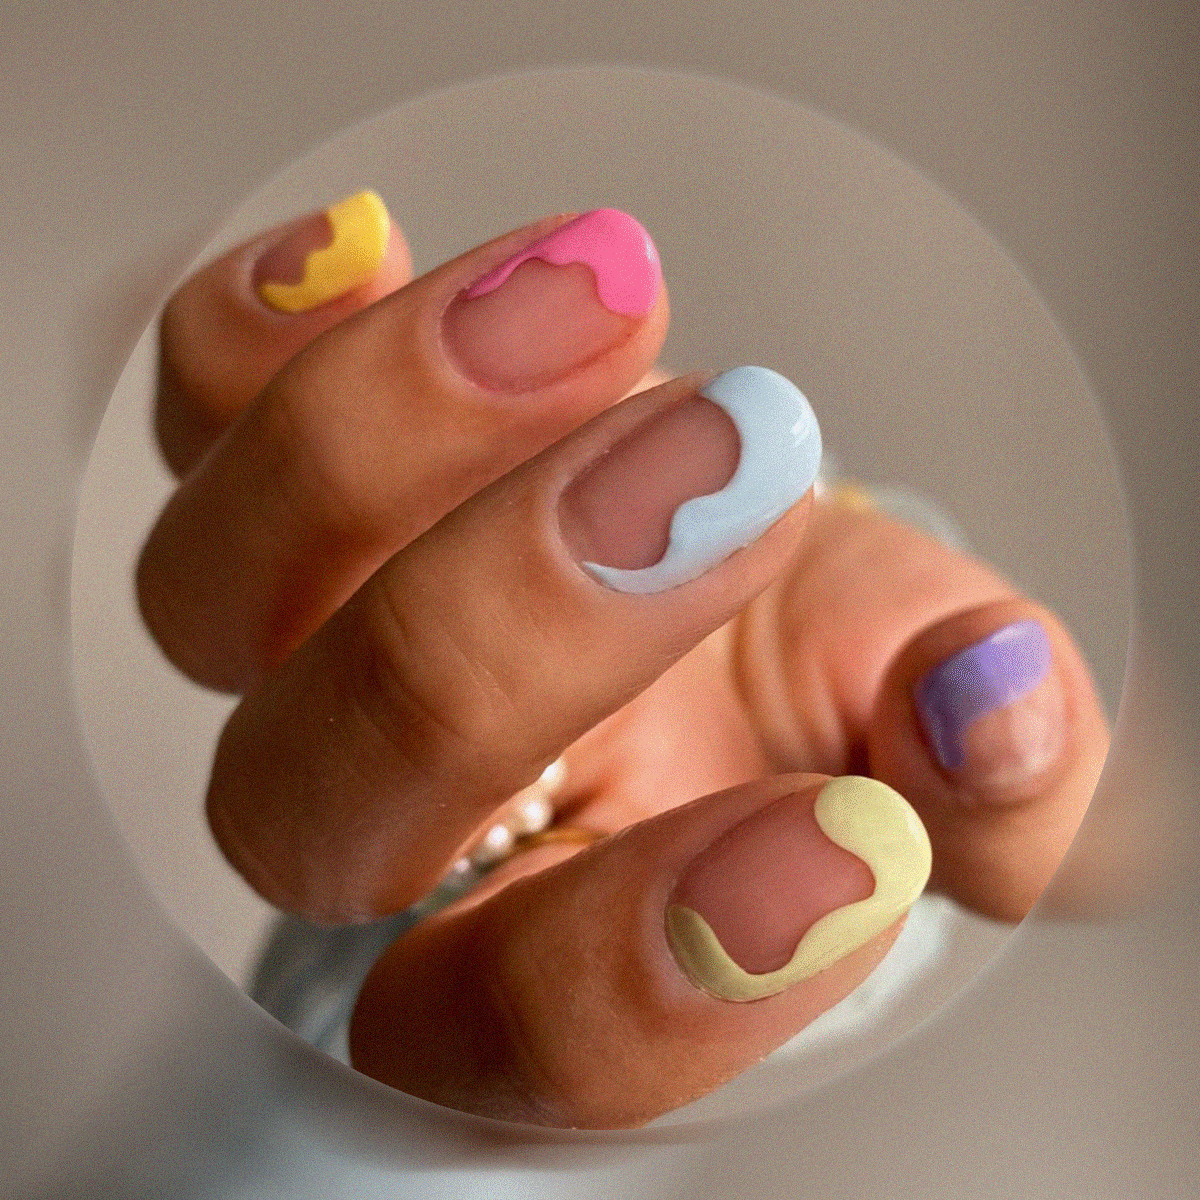 12 Pastel Nail Ideas to Try in 2022 | Who What Wear